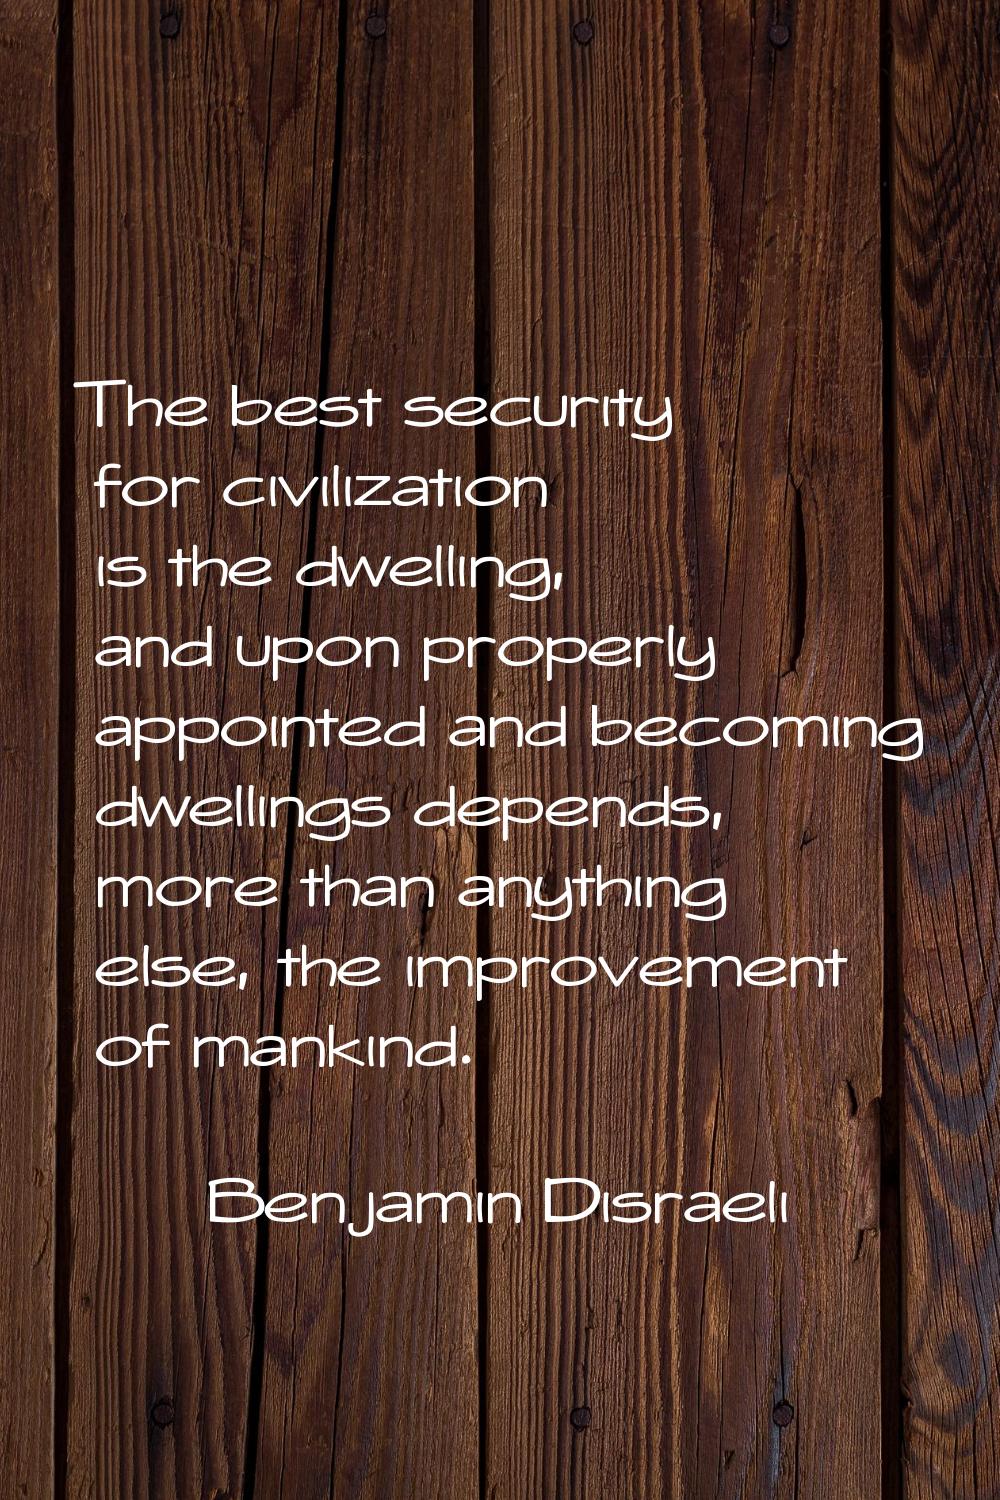 The best security for civilization is the dwelling, and upon properly appointed and becoming dwelli